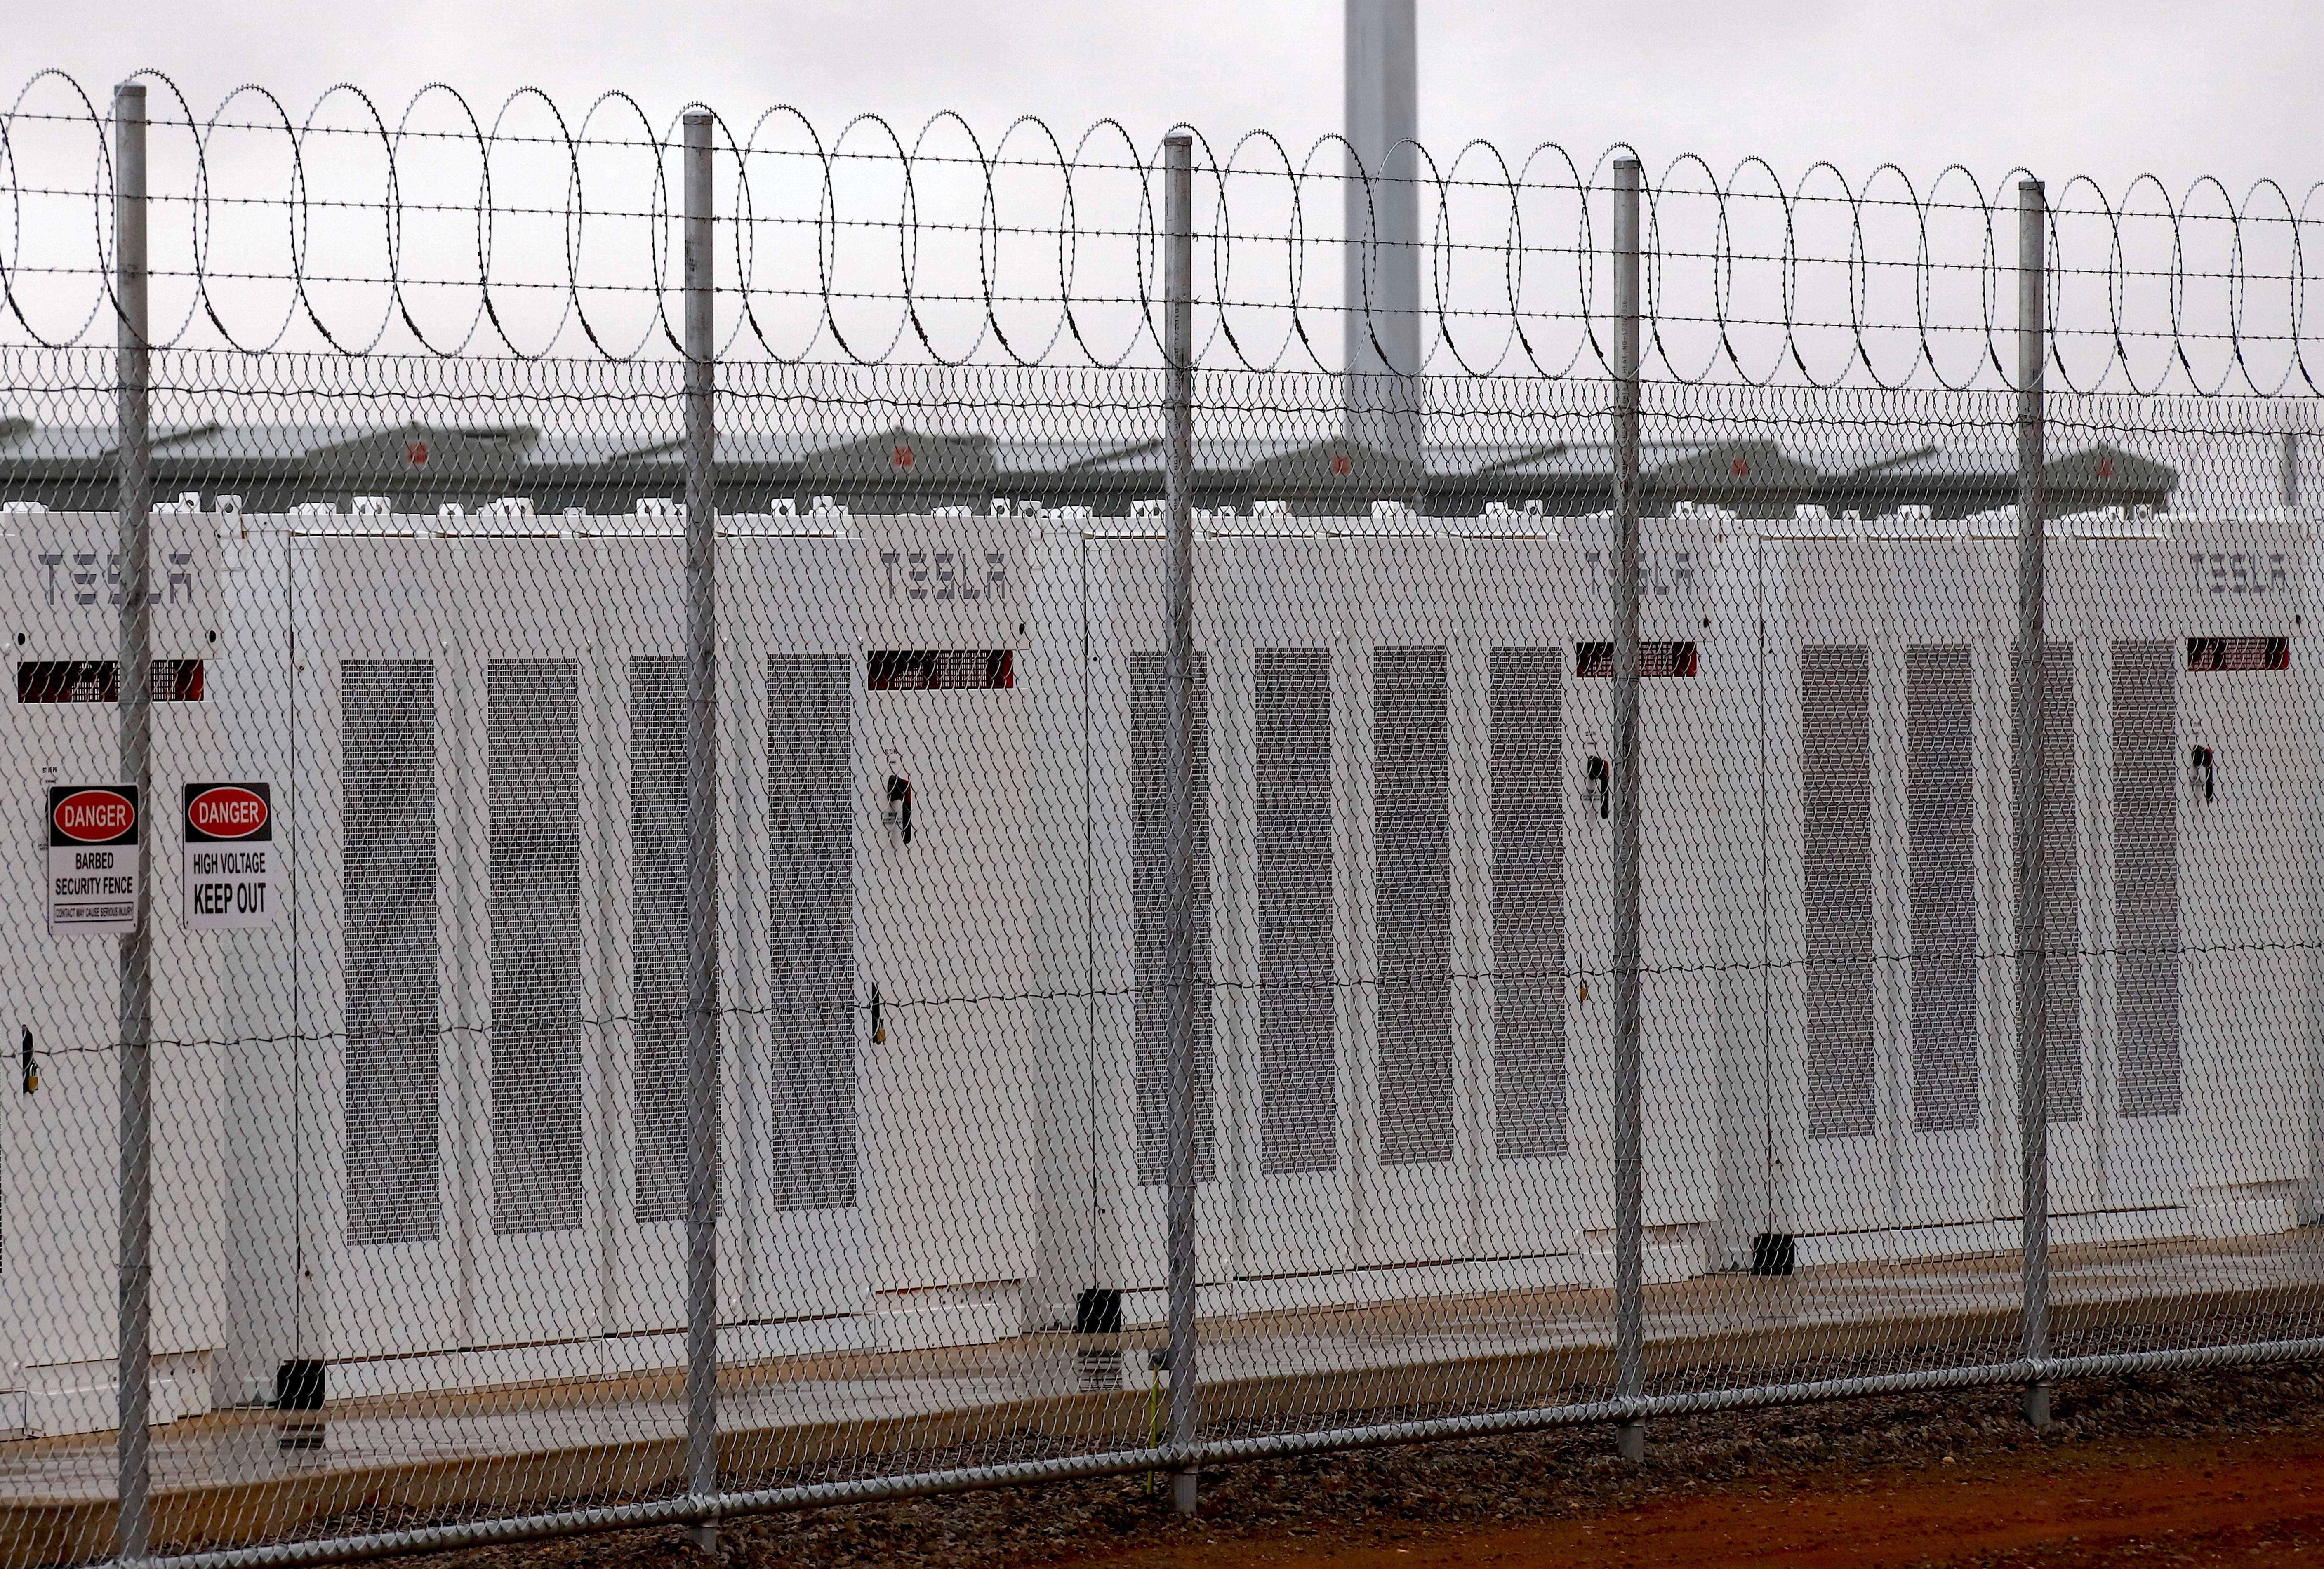 A fence surrounds the Hornsdale Power Reserve, featuring a lithium-ion battery made by Tesla, near the South Australian town of Jamestown